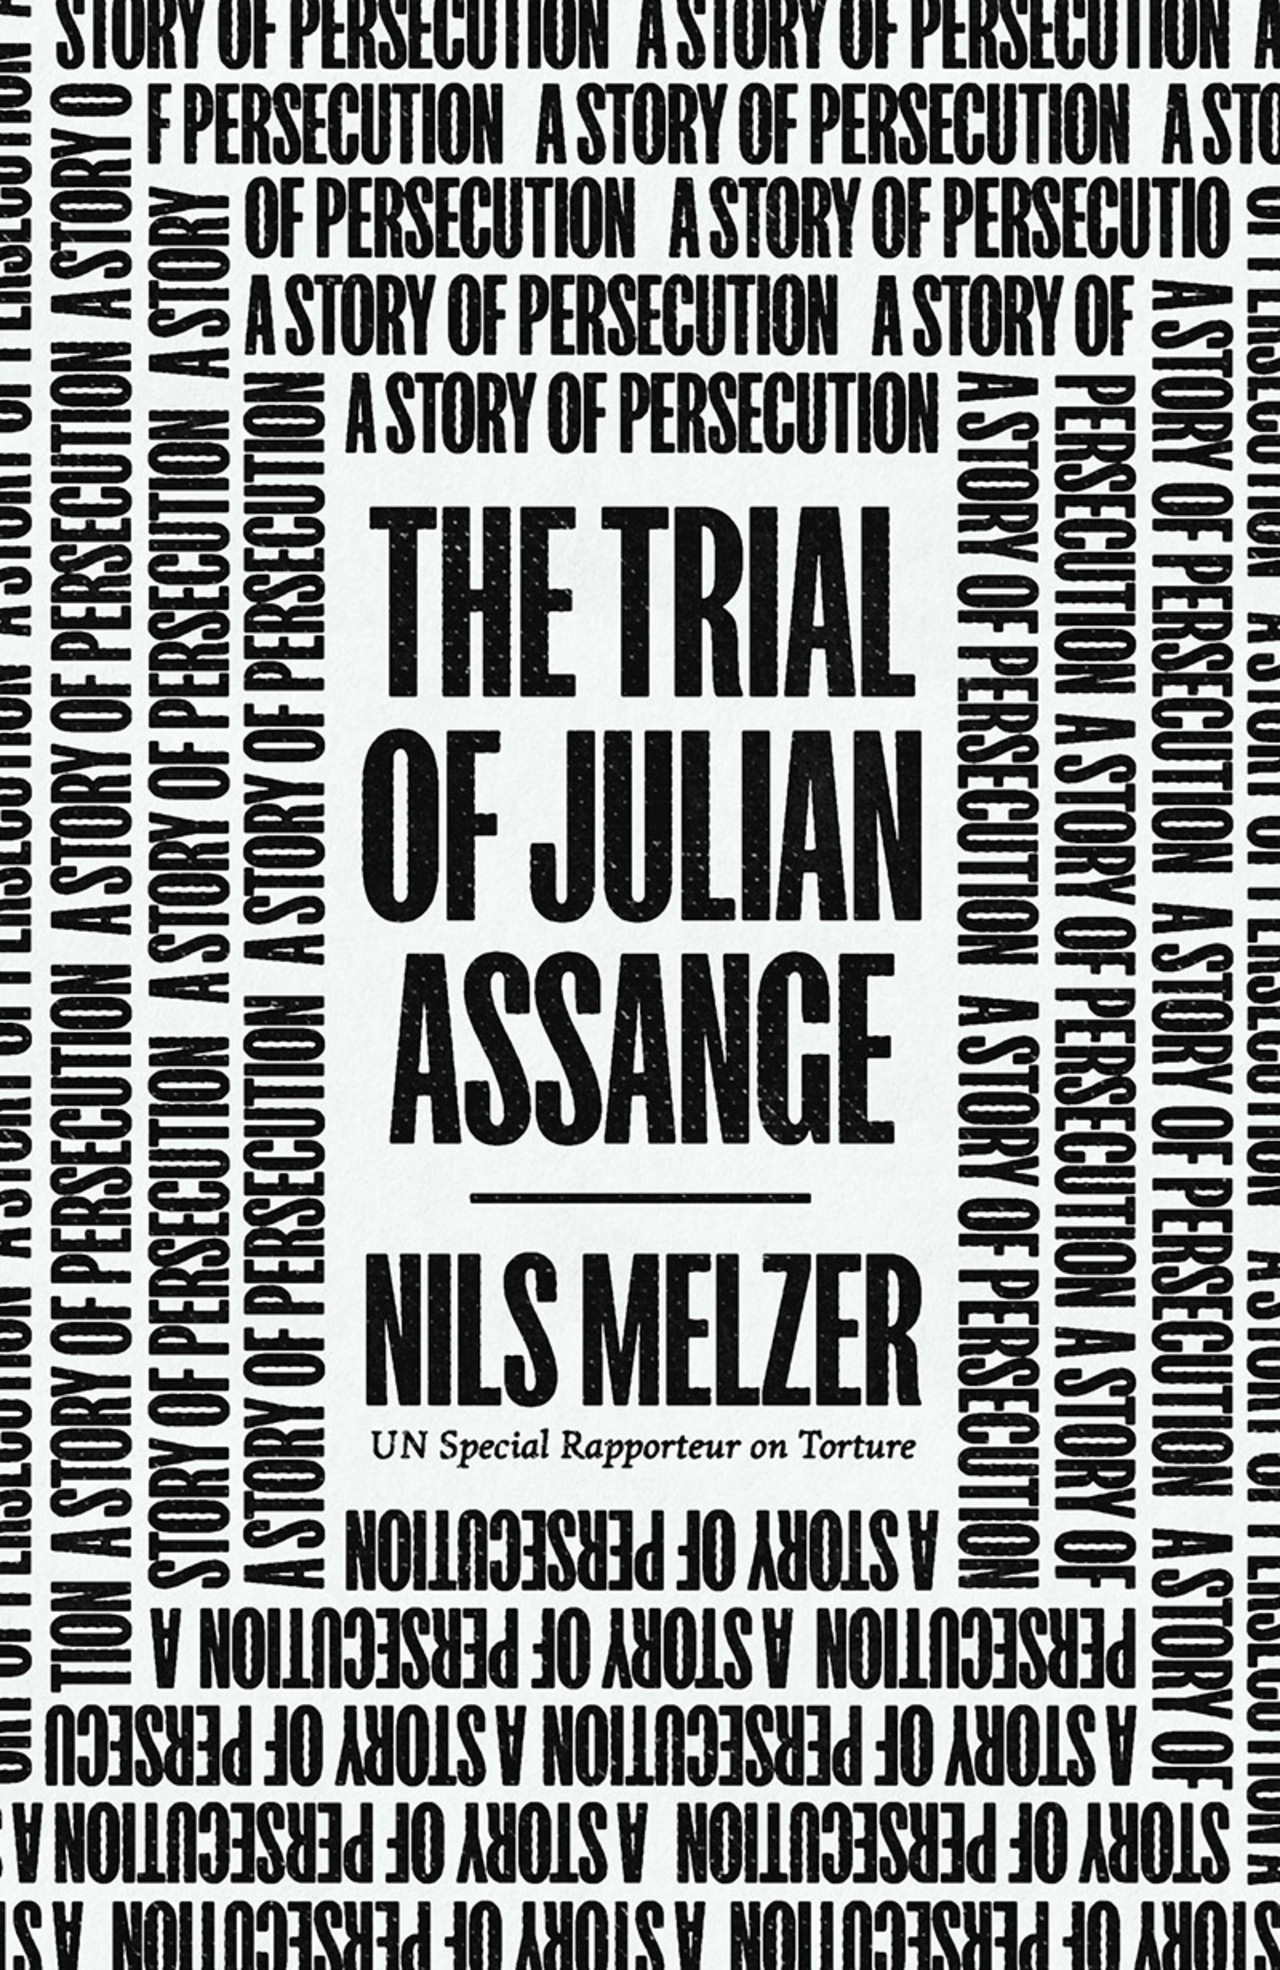 Book release: The Trial of Julian Assange